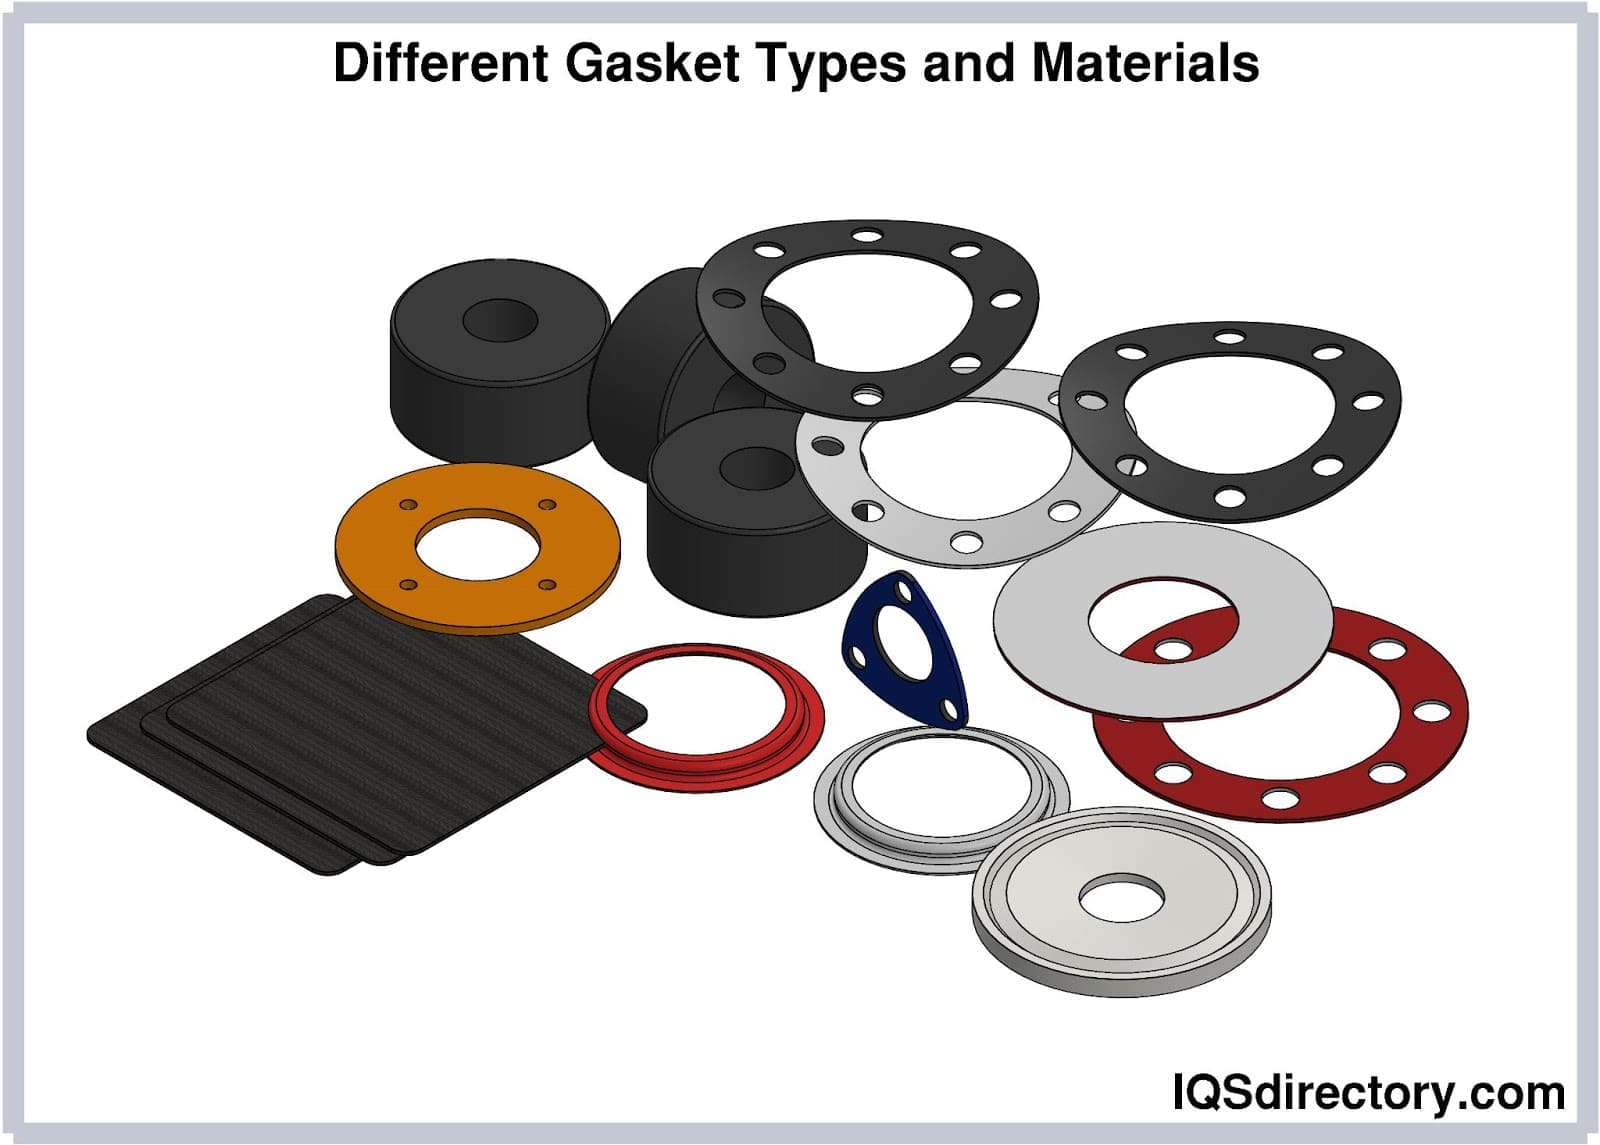 Different Gasket Types and Materials